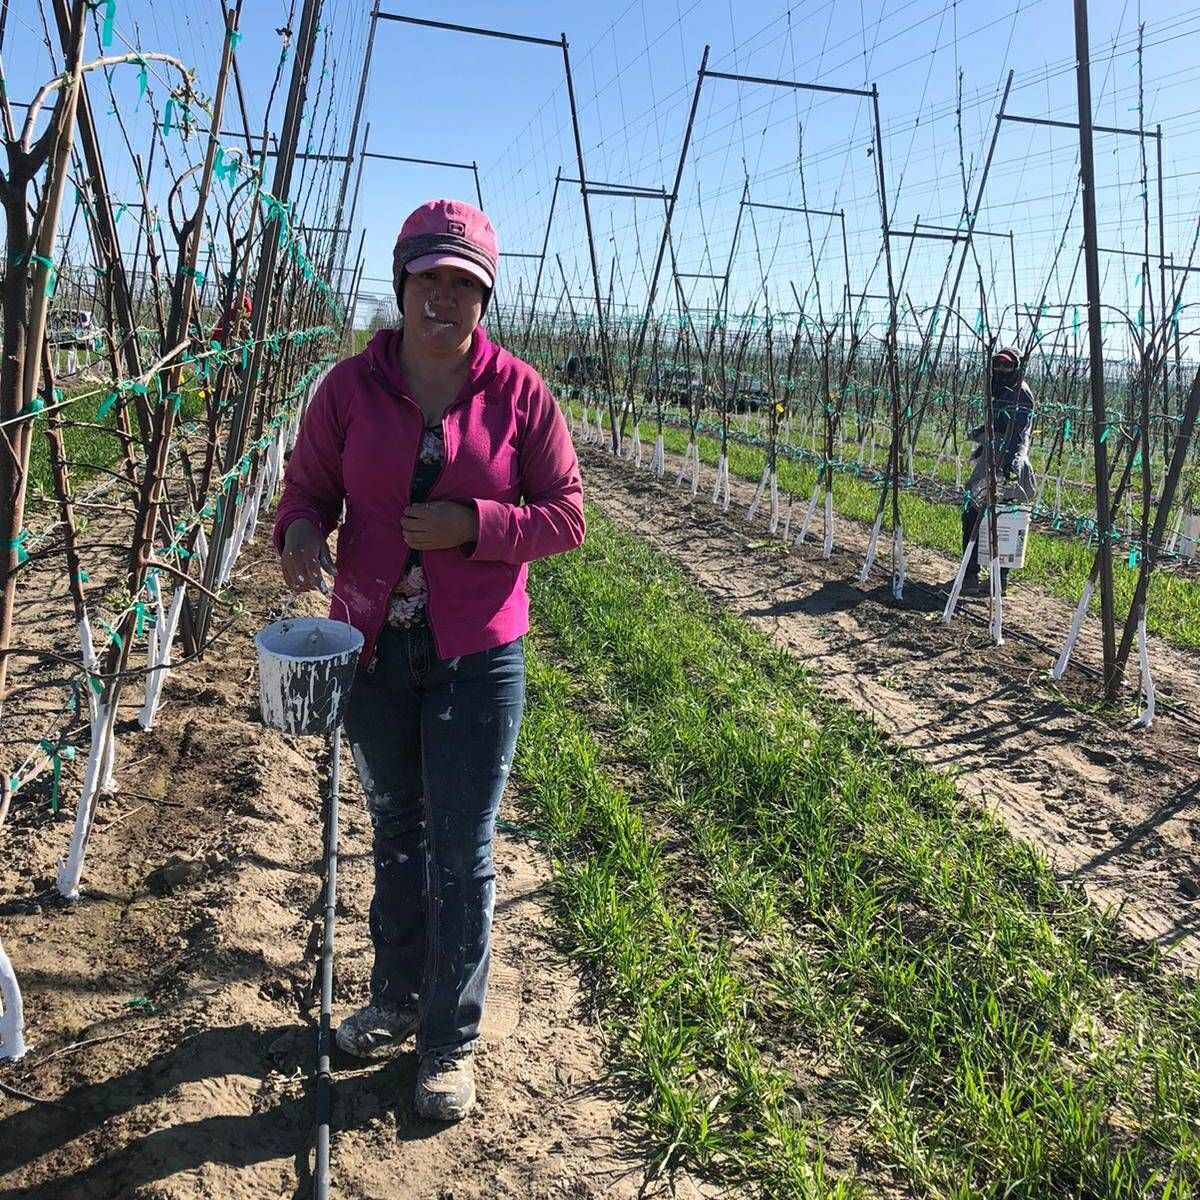 Maria is painting apple trees in WA state. The trees are painted white to reflect sunlight & to keep the bark from splitting when exposed to extreme temperatures. When you put an apple in your child’s lunchbox, remember the skilled work of farm workers like Maria. #WeFeedYou